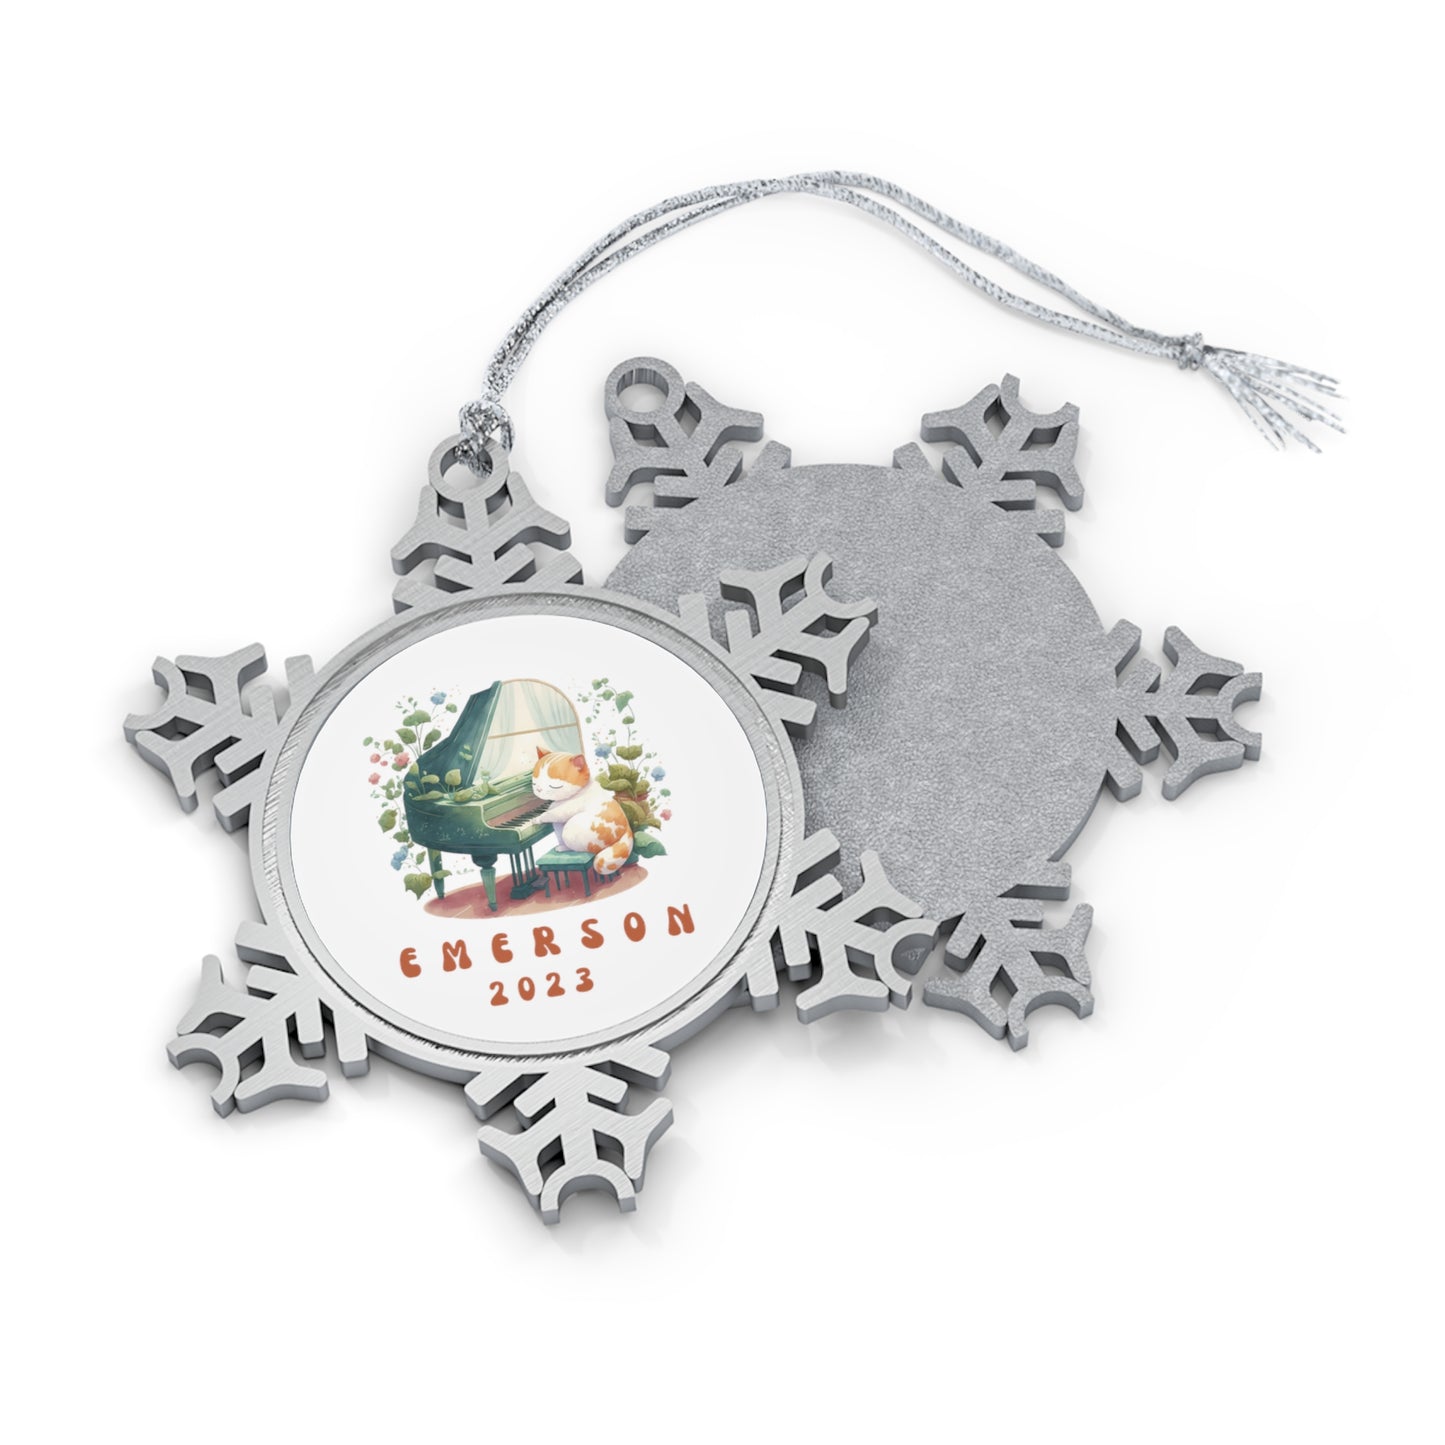 Personalised Pewter Snowflake Ornament | Funny Cat Play Piano